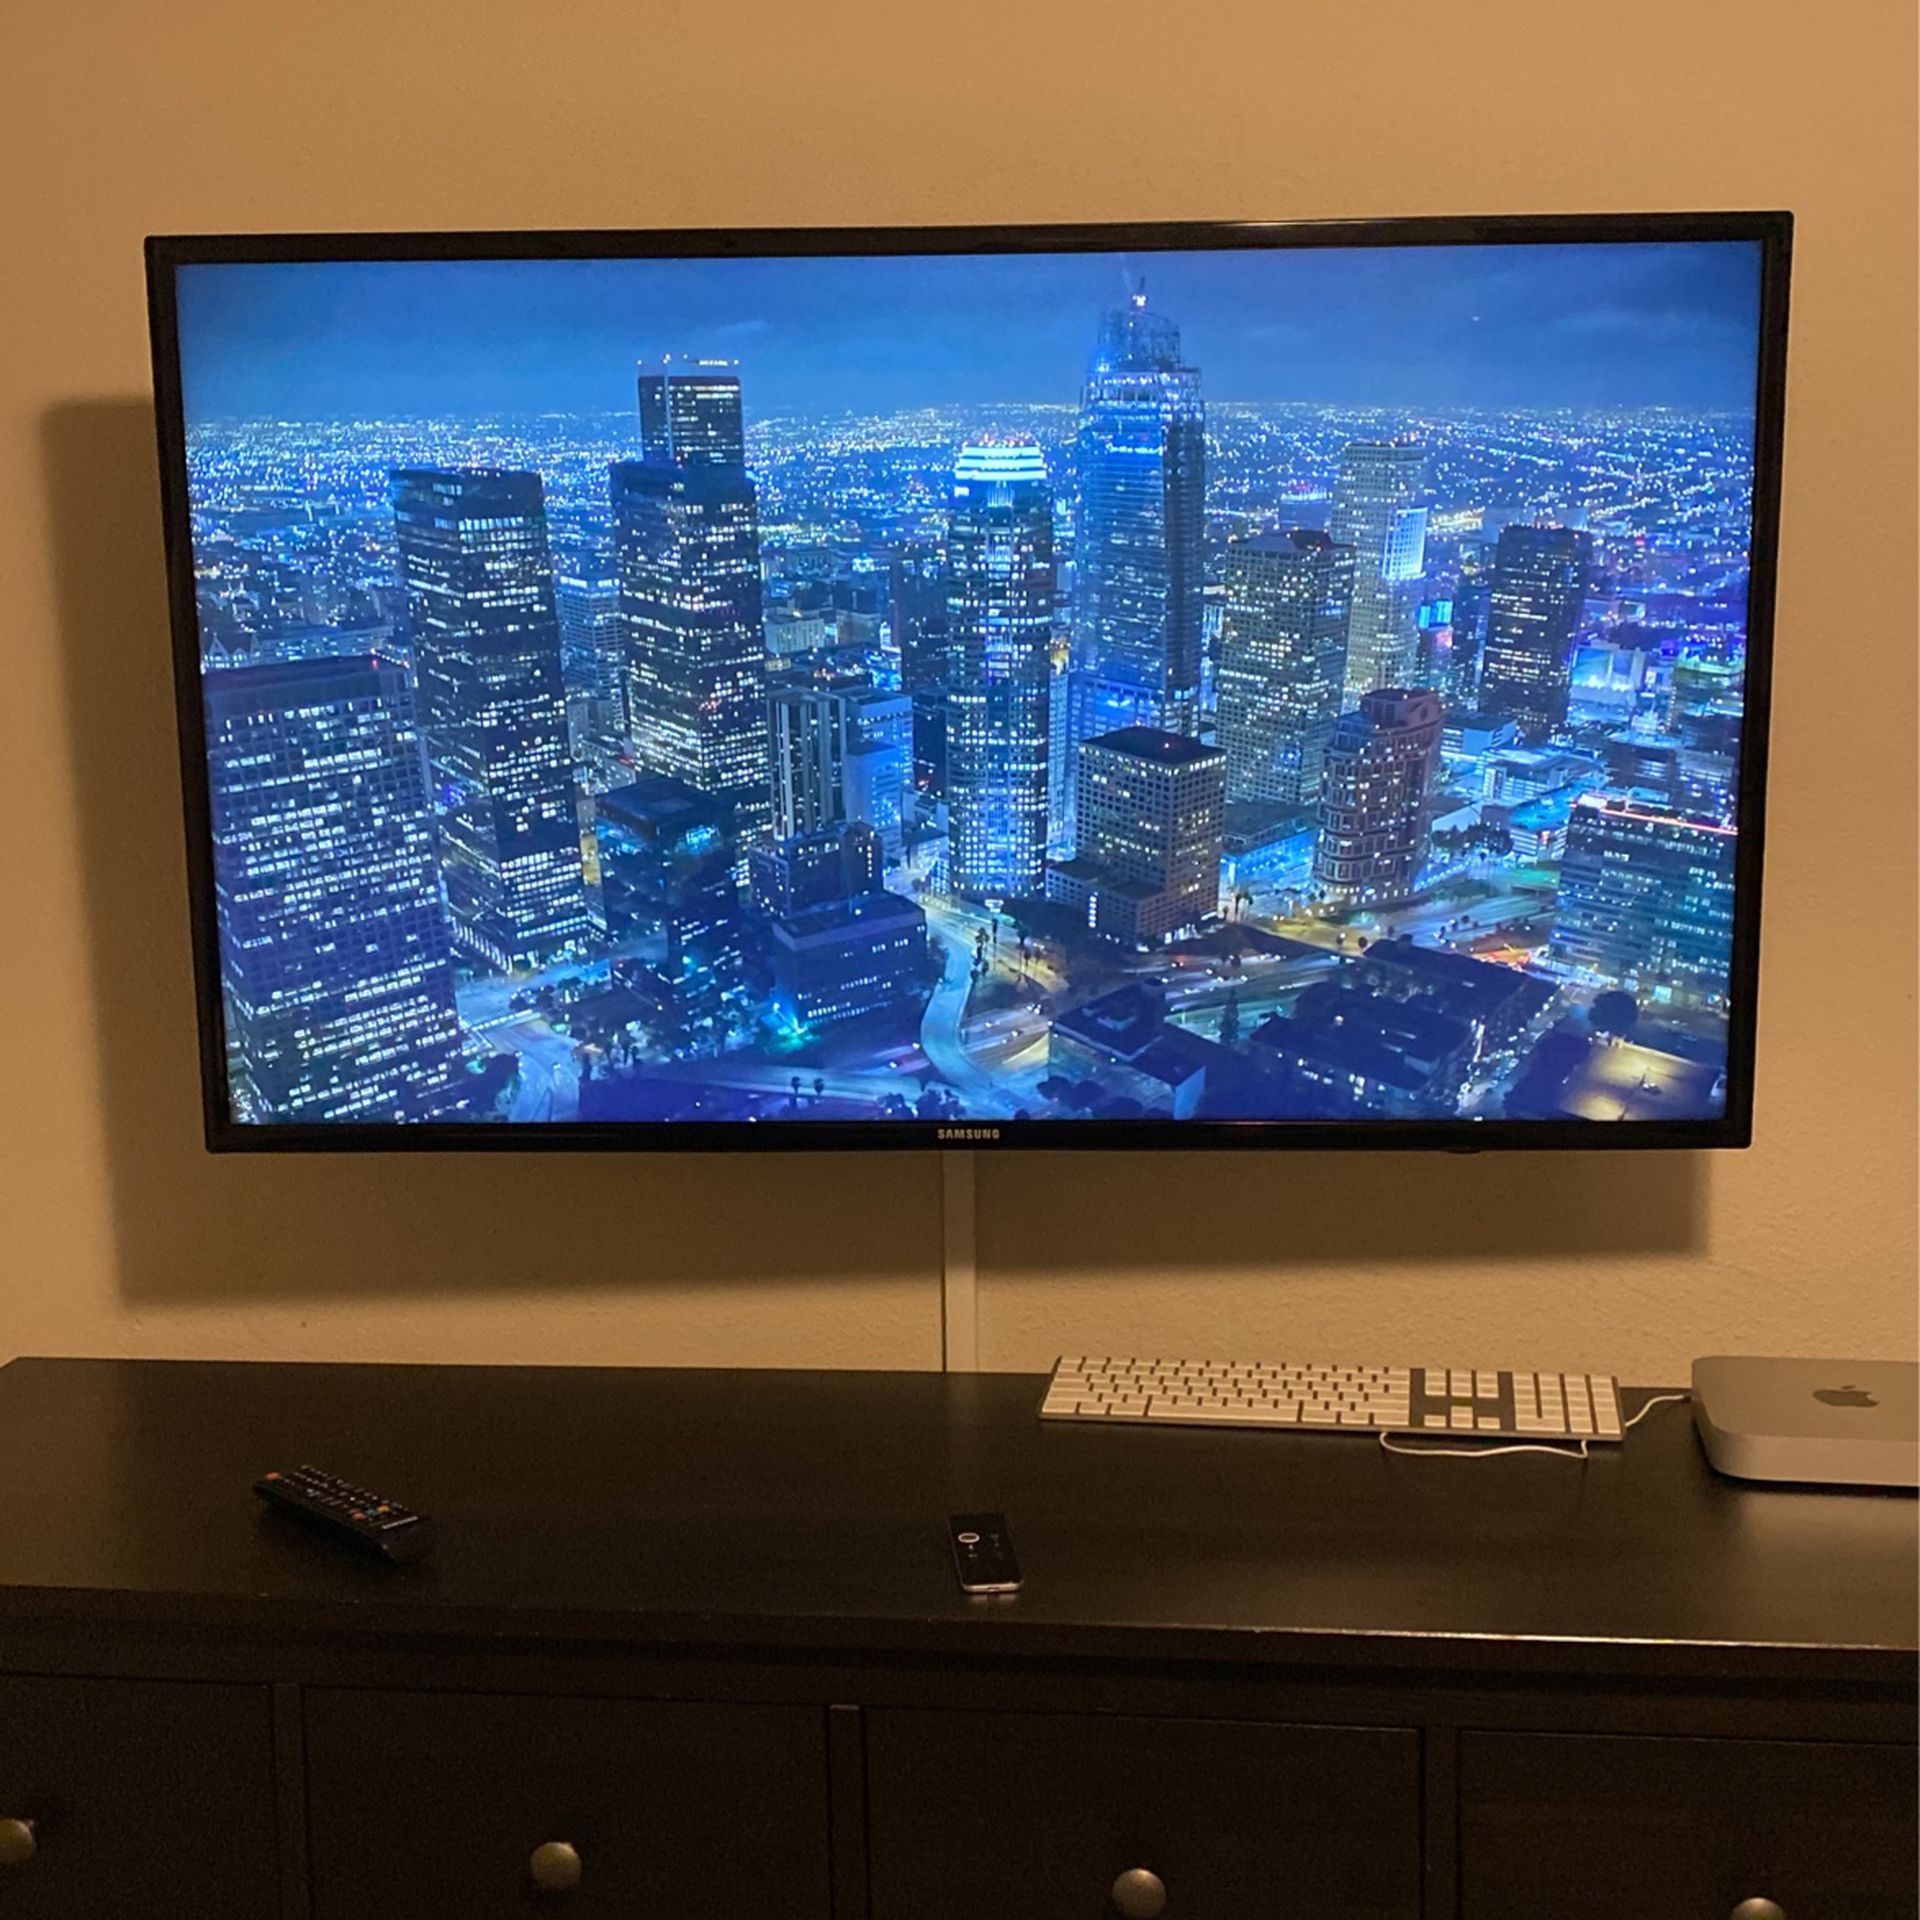 Samsung 50” LED TV with Swiveling Wall Mount 